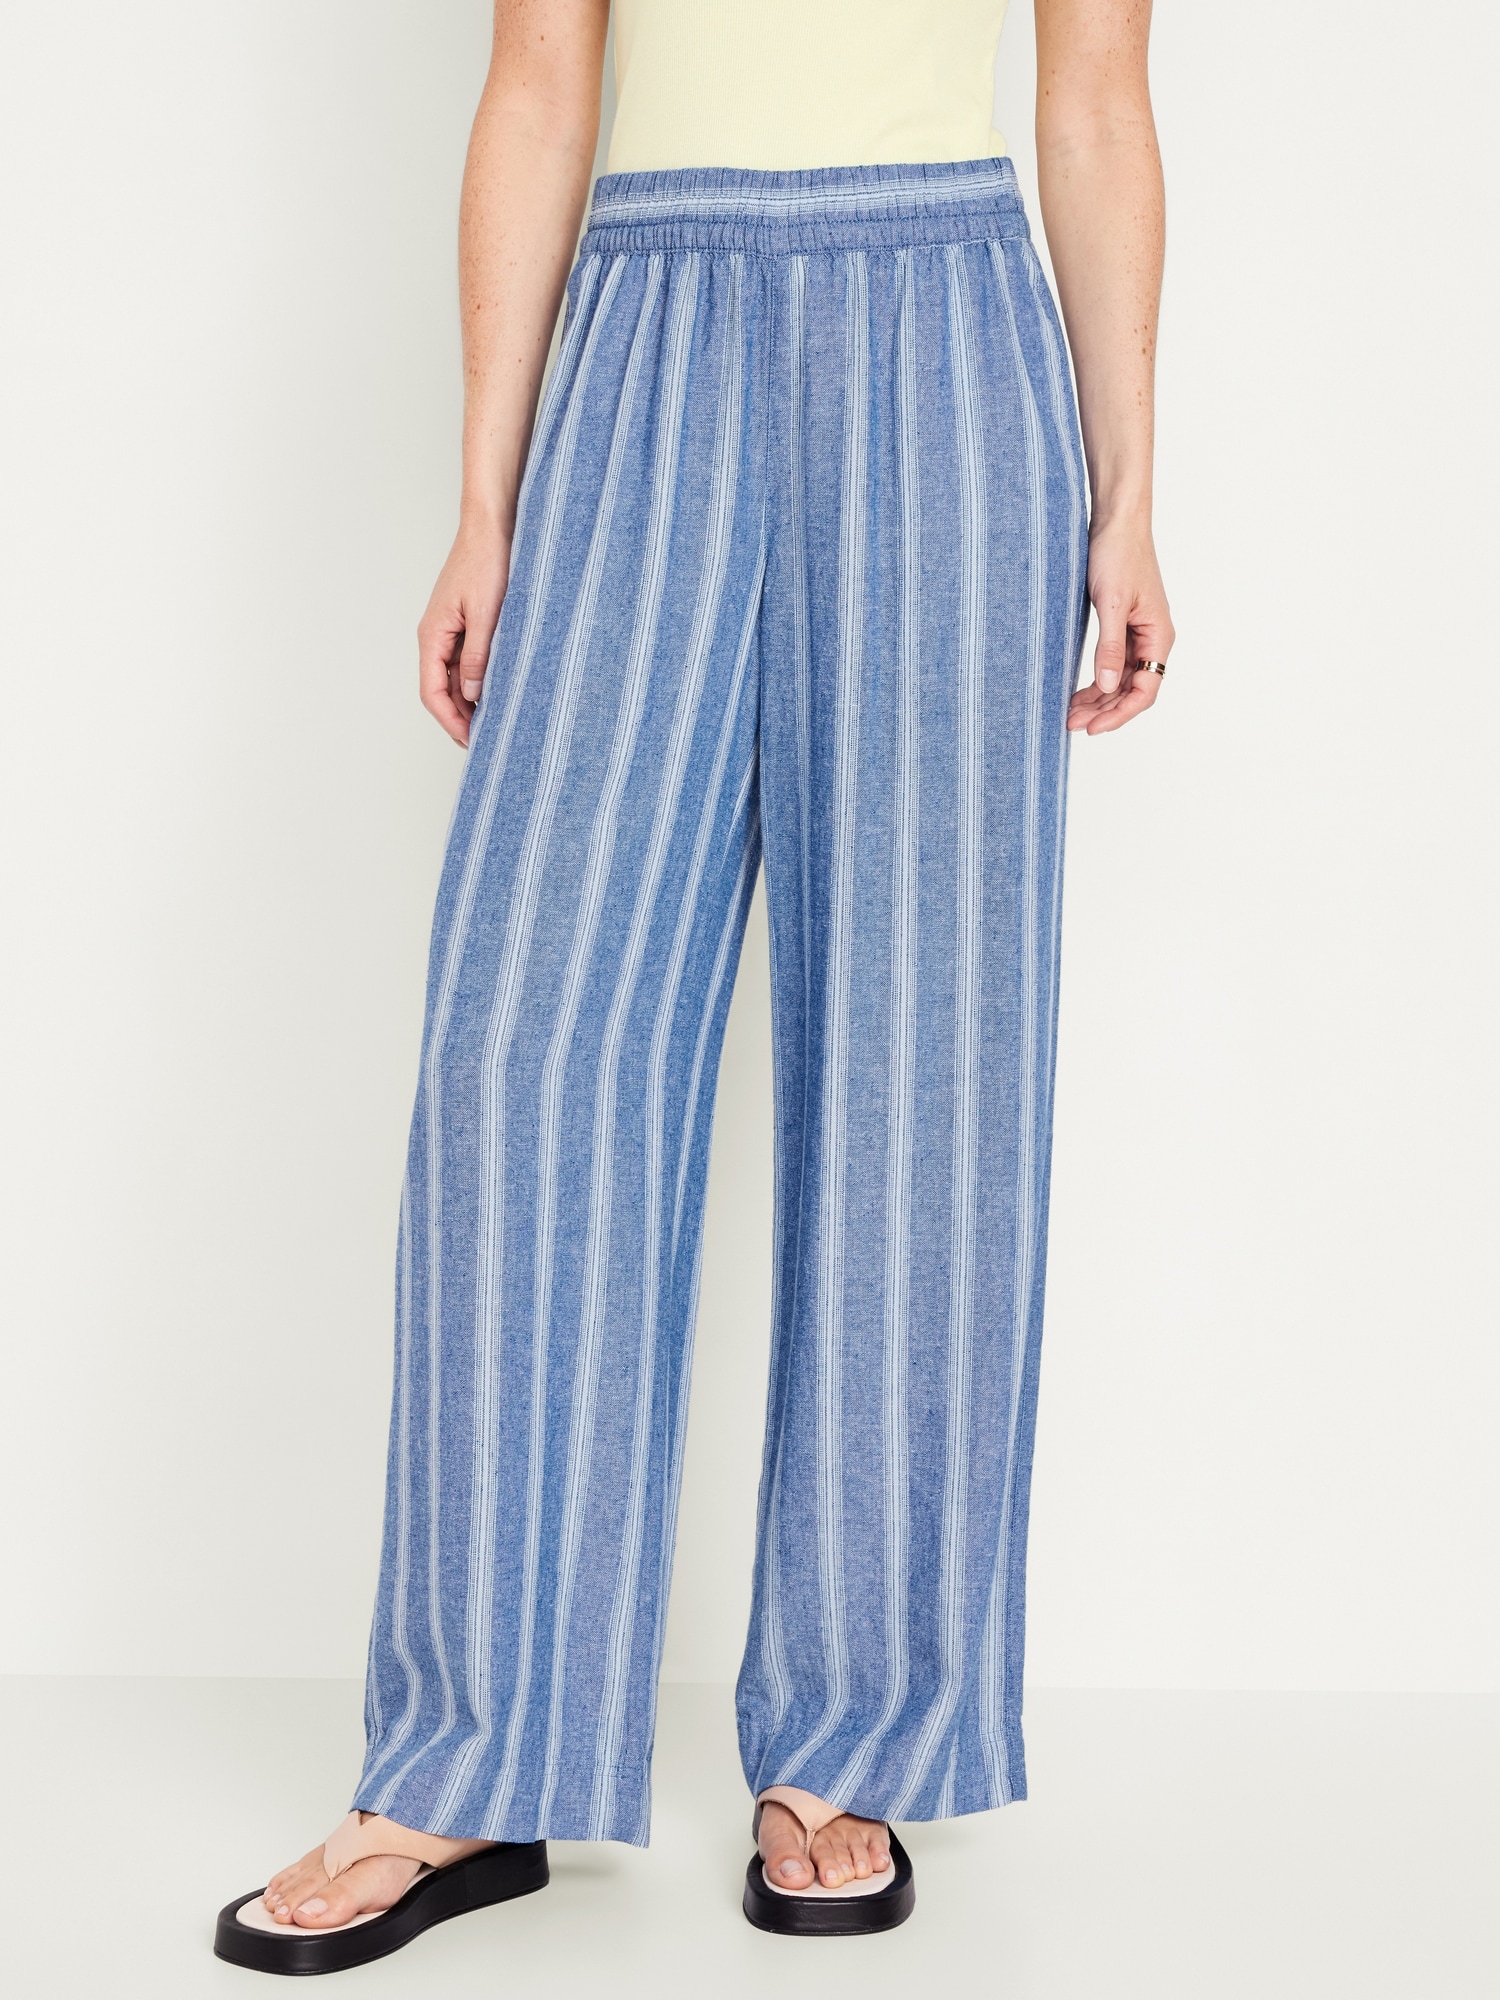 Women's Lounge Pants  Old Navy Canada Canada